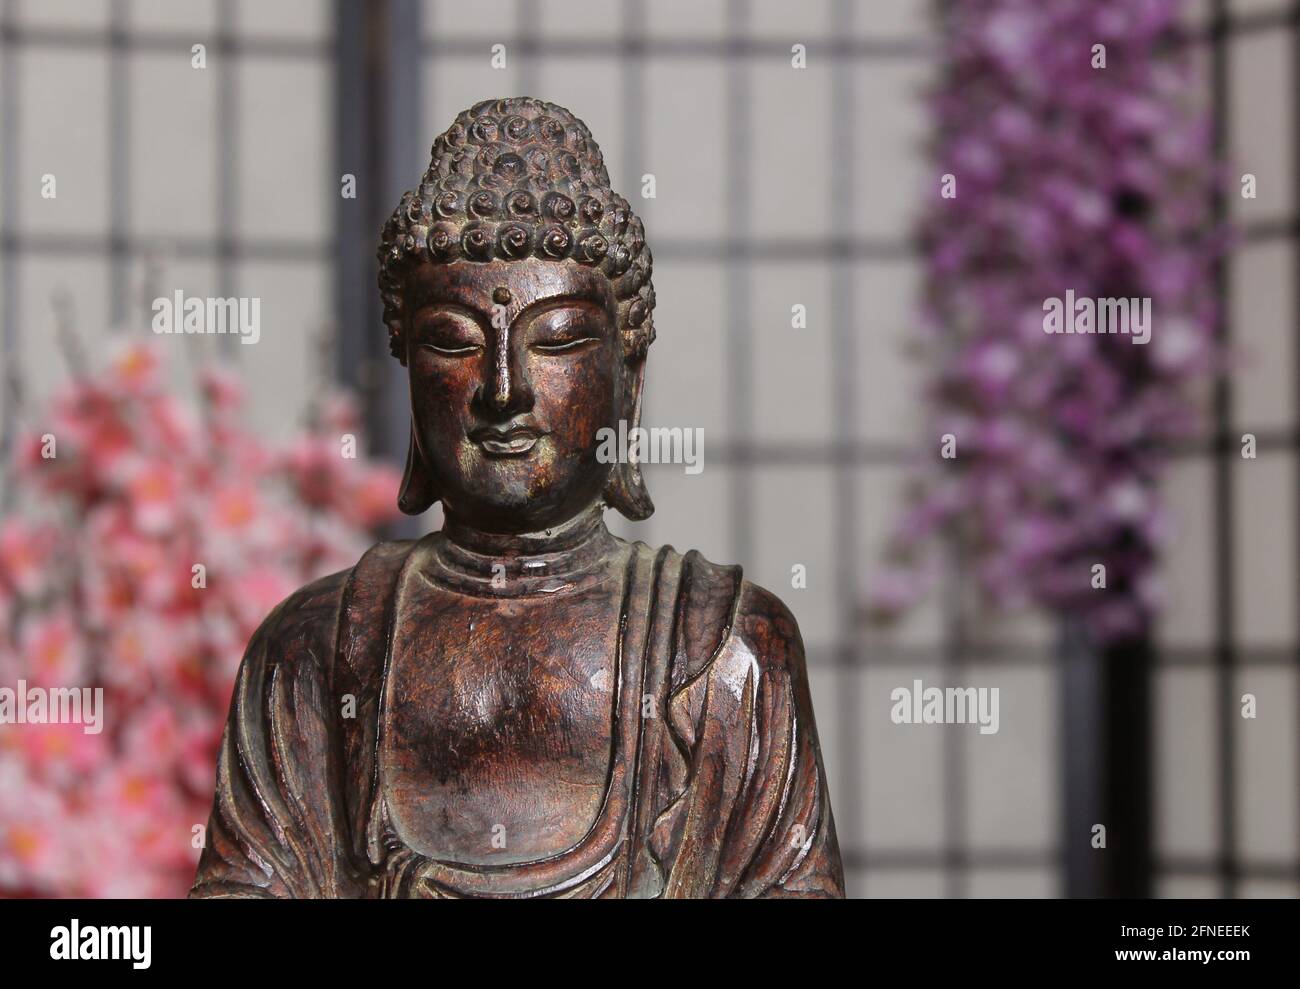 Buddha Statue in Asian Style Room With Cherry Blossoms in Background Indoors Stock Photo